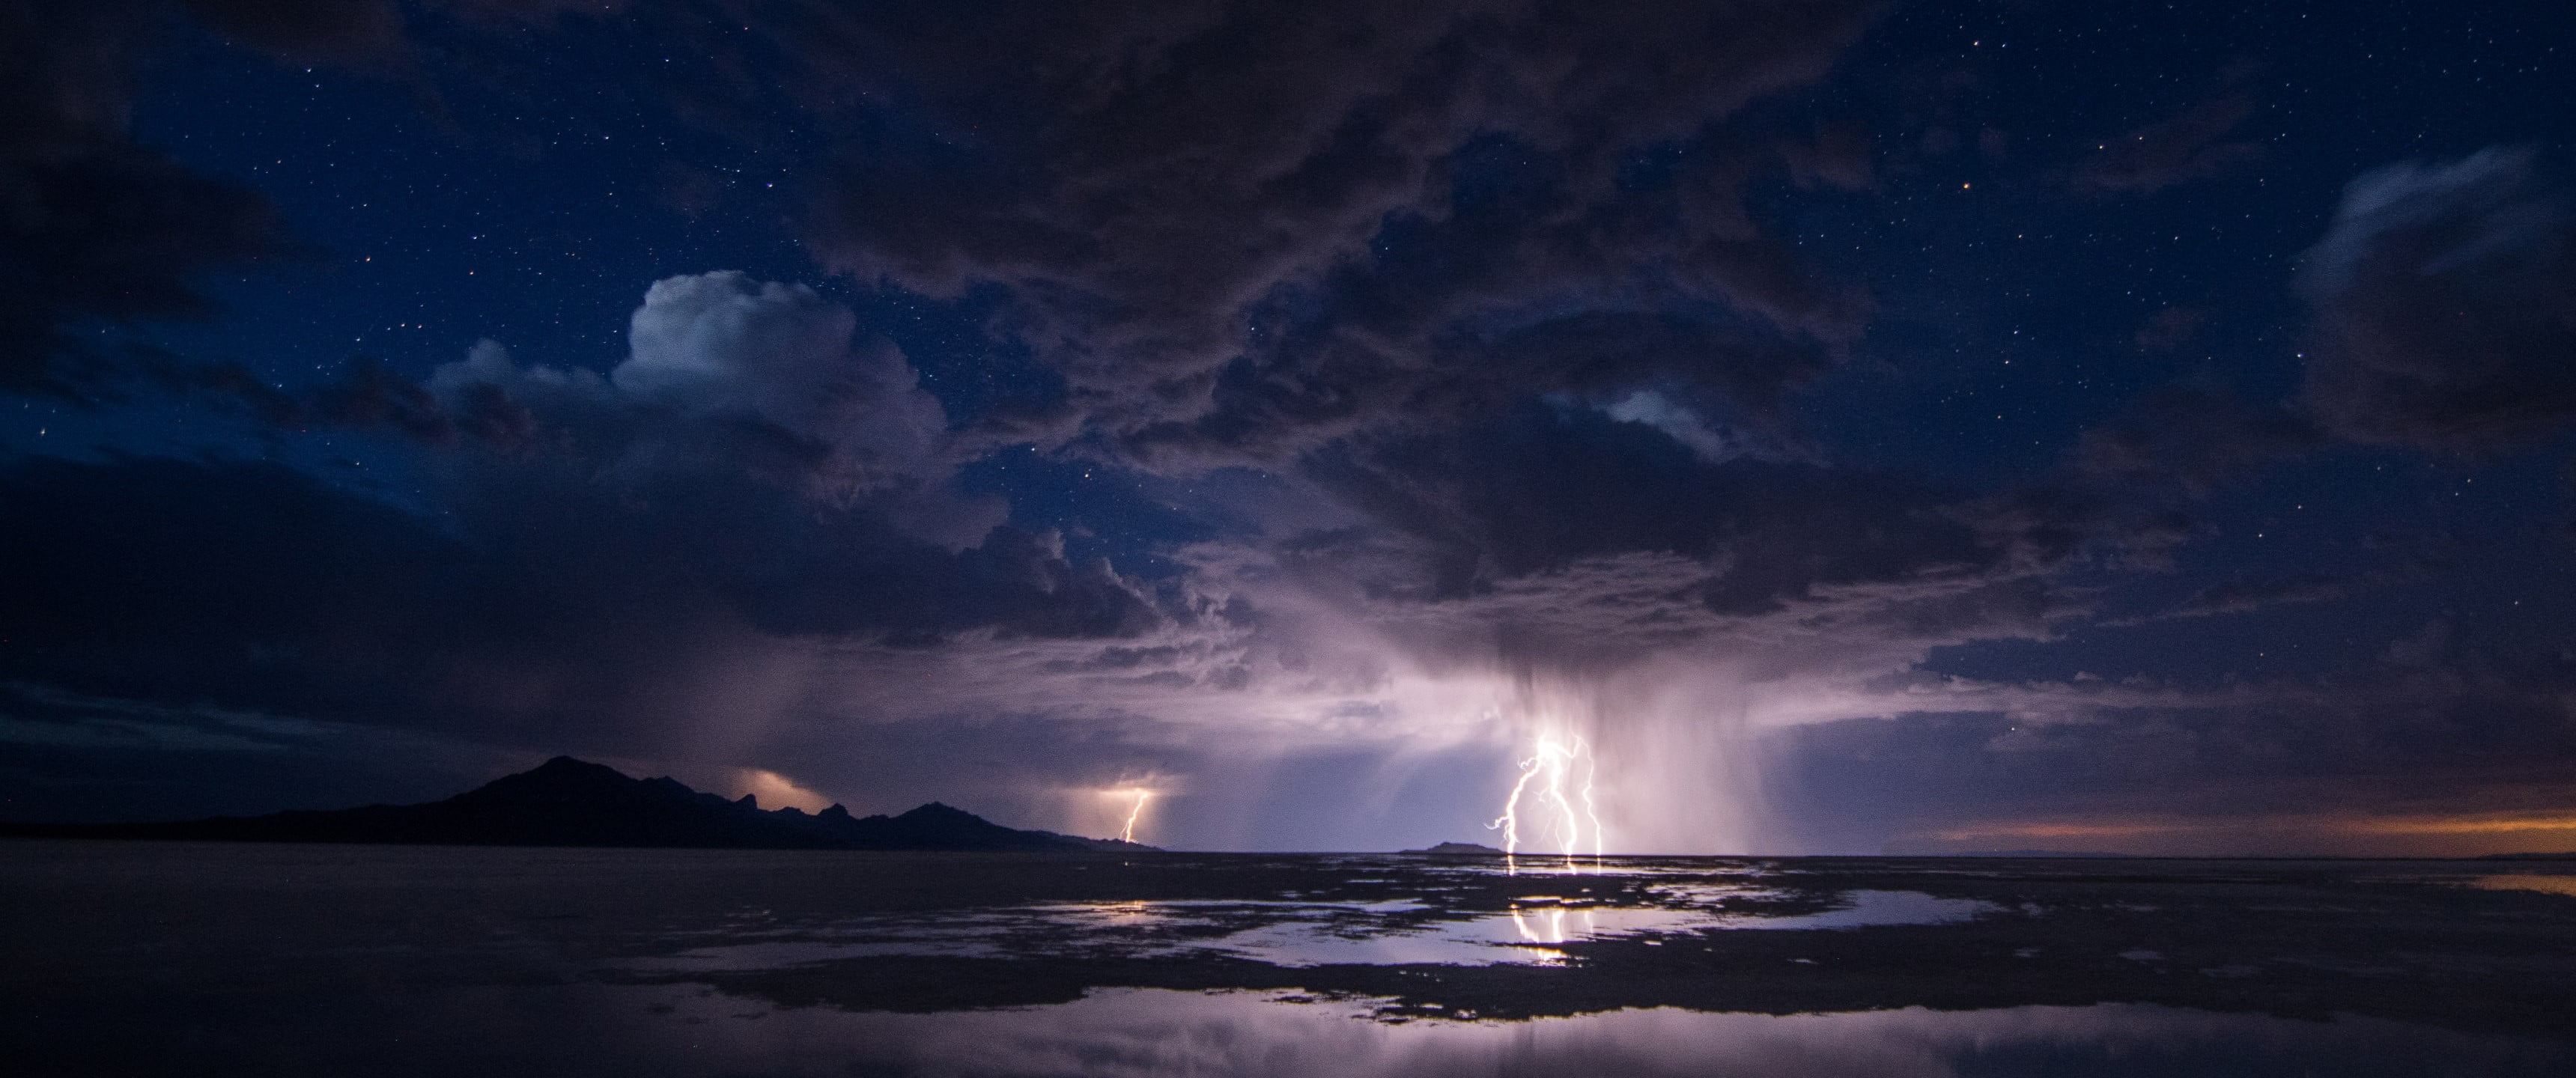 clouds and lightning, nature